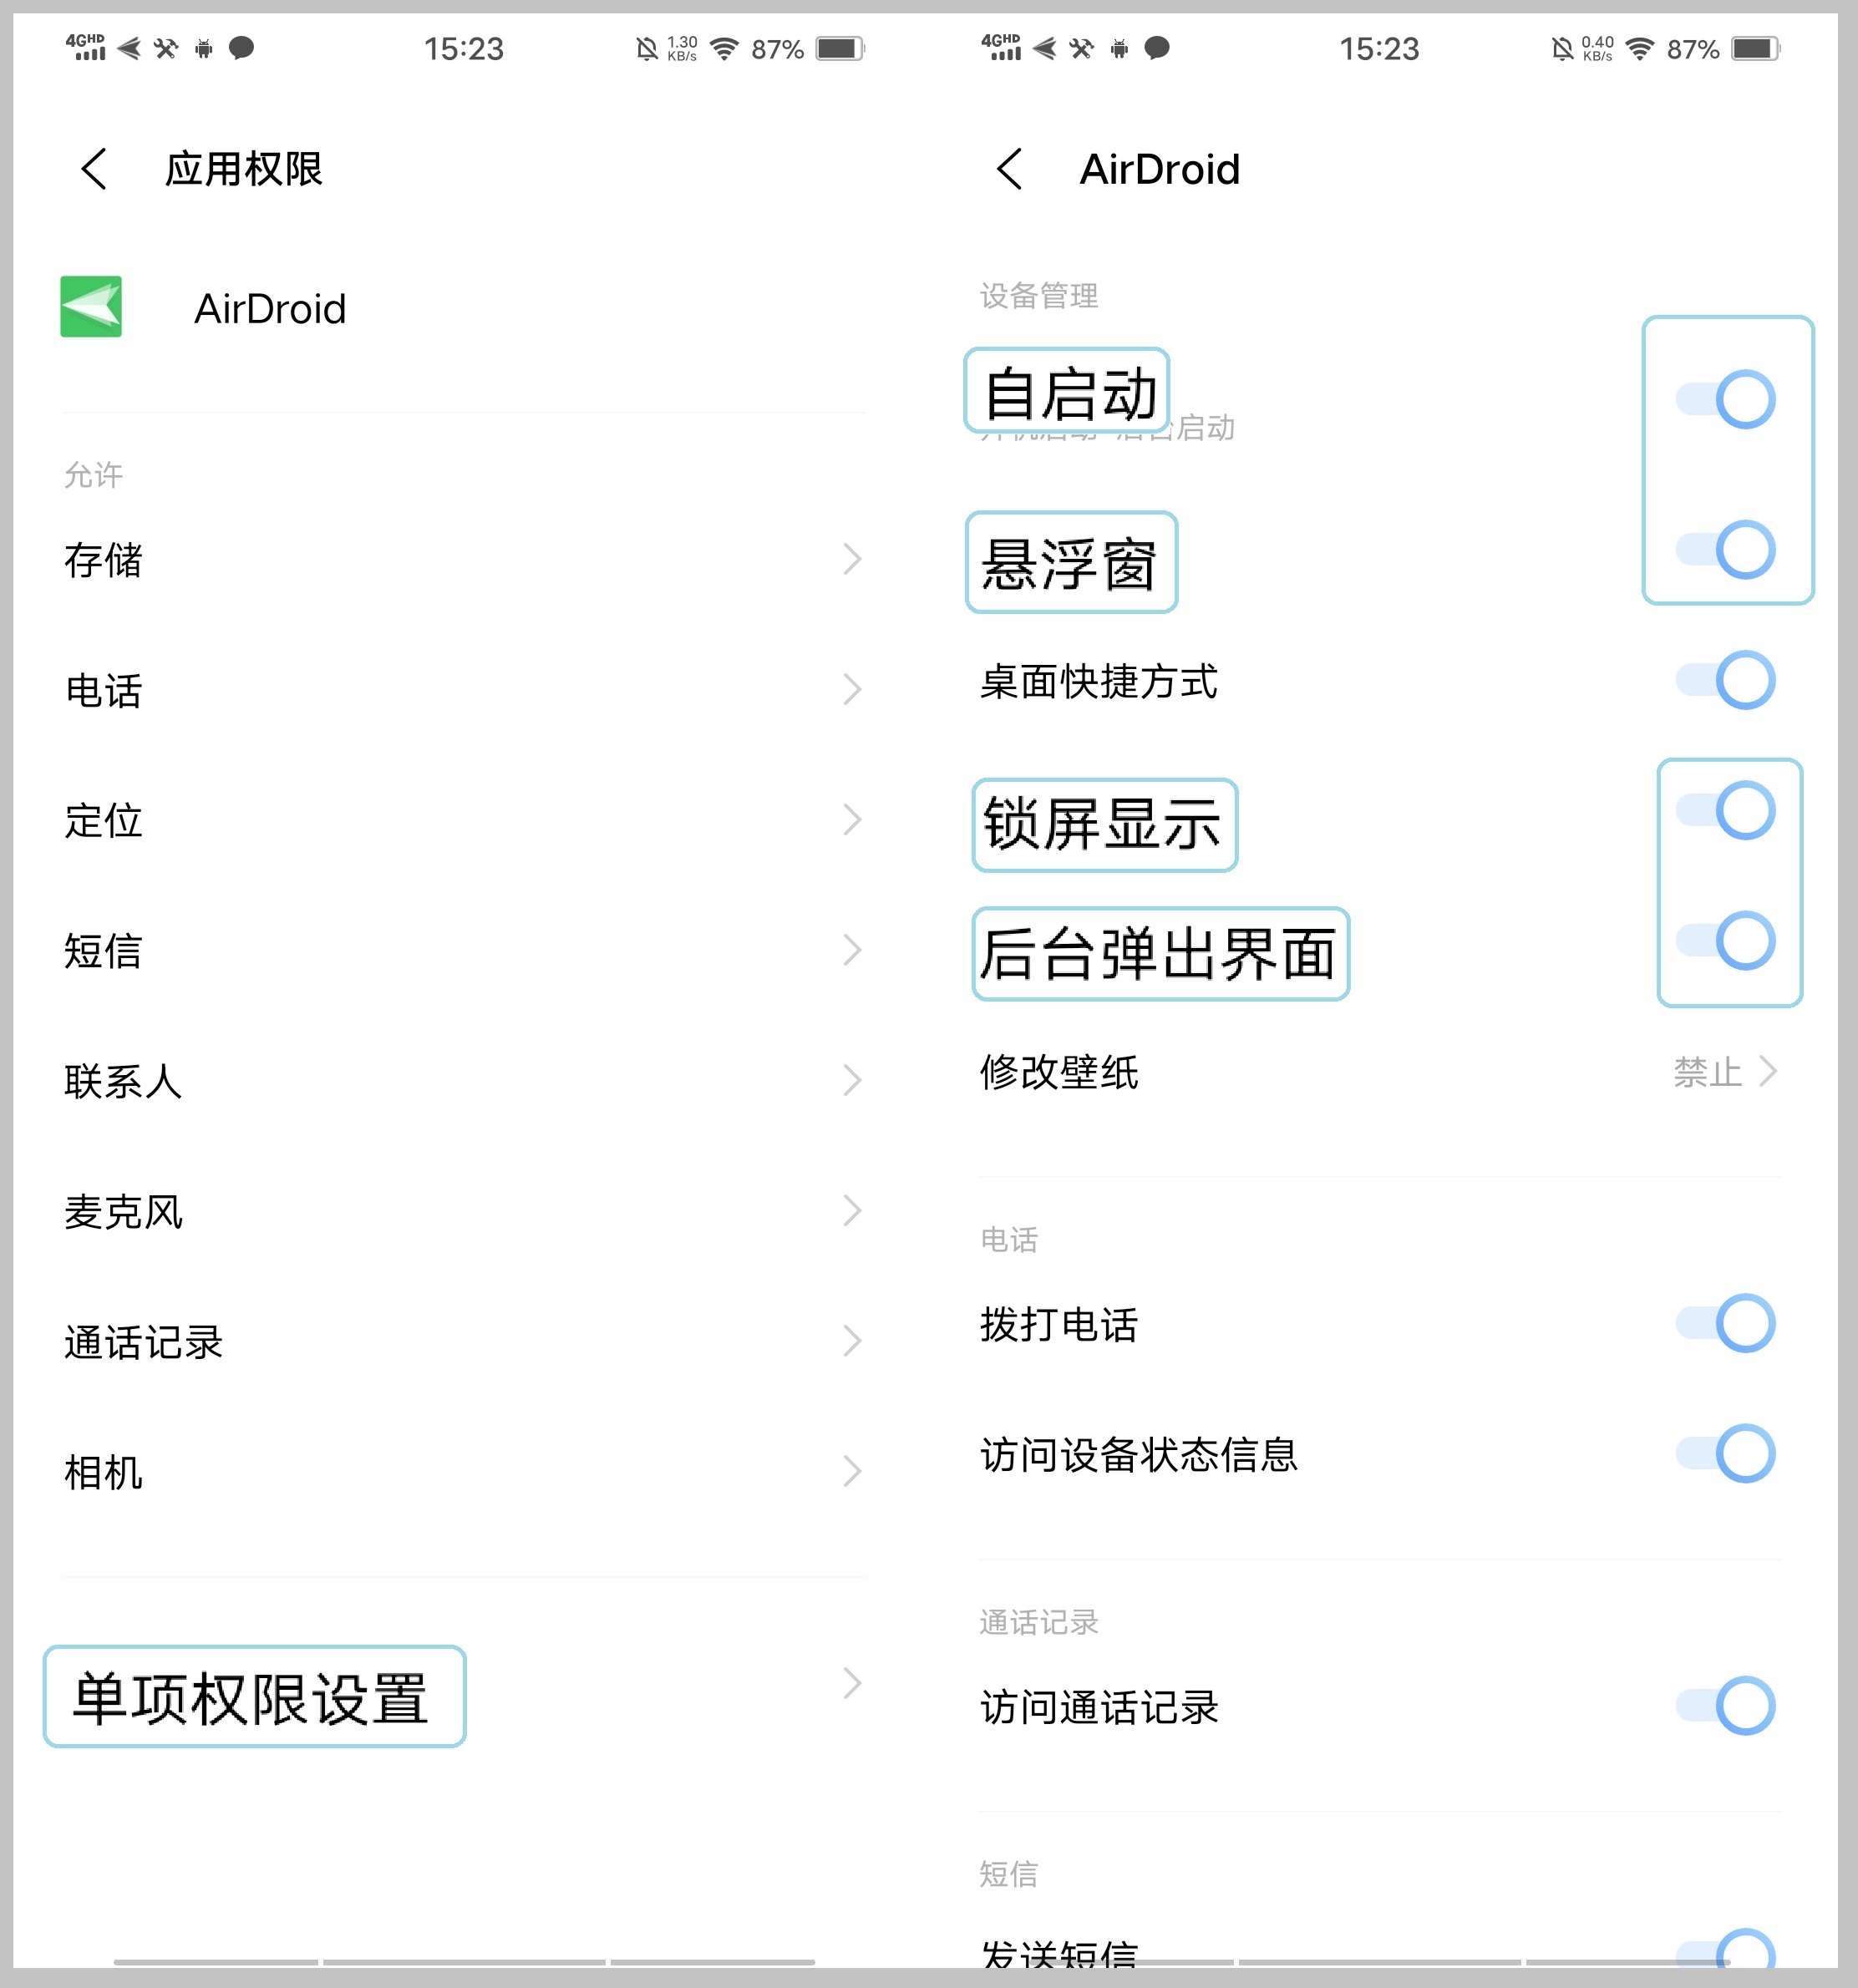 cn_-_Android_10_-_keep_AirDroid_running_on_vivo_-4.jpg